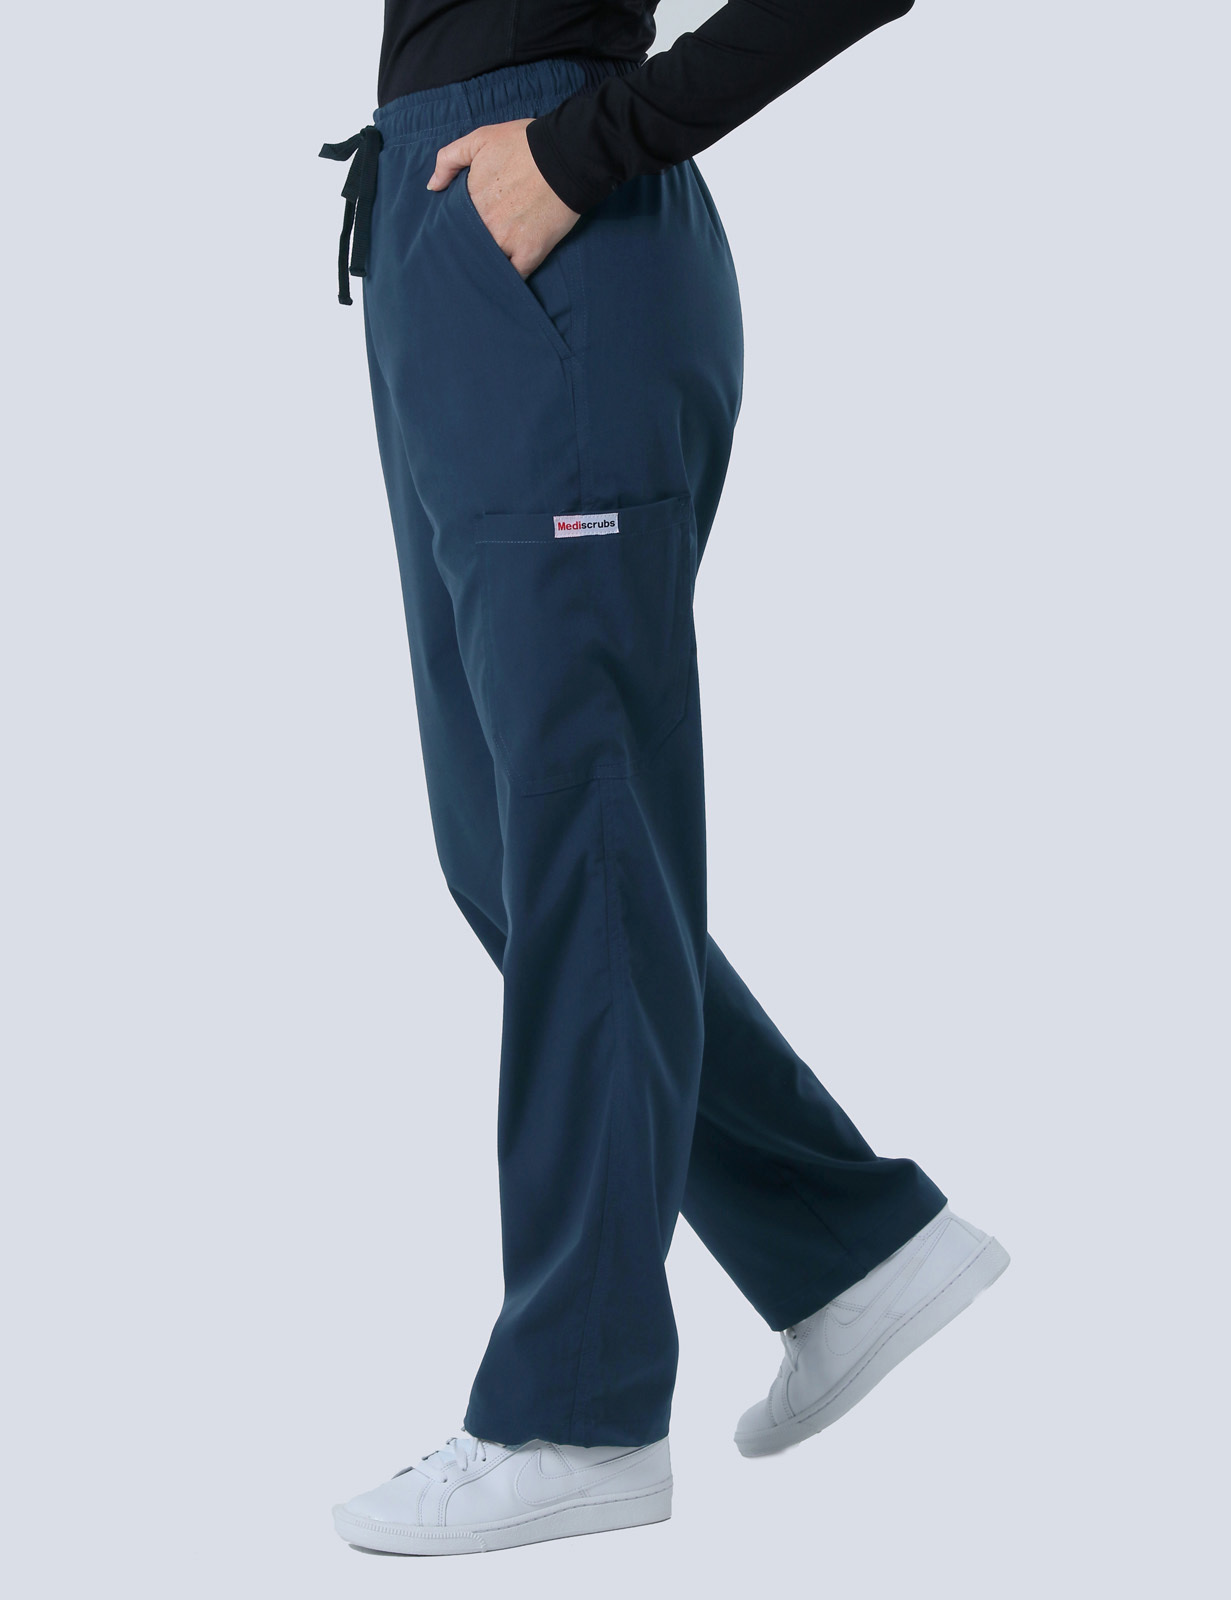 Rockhampton Hospital Special Care  Uniform Set Bndle (Women's Fit Solid Top and Cargo Pants in Navy + Logos)